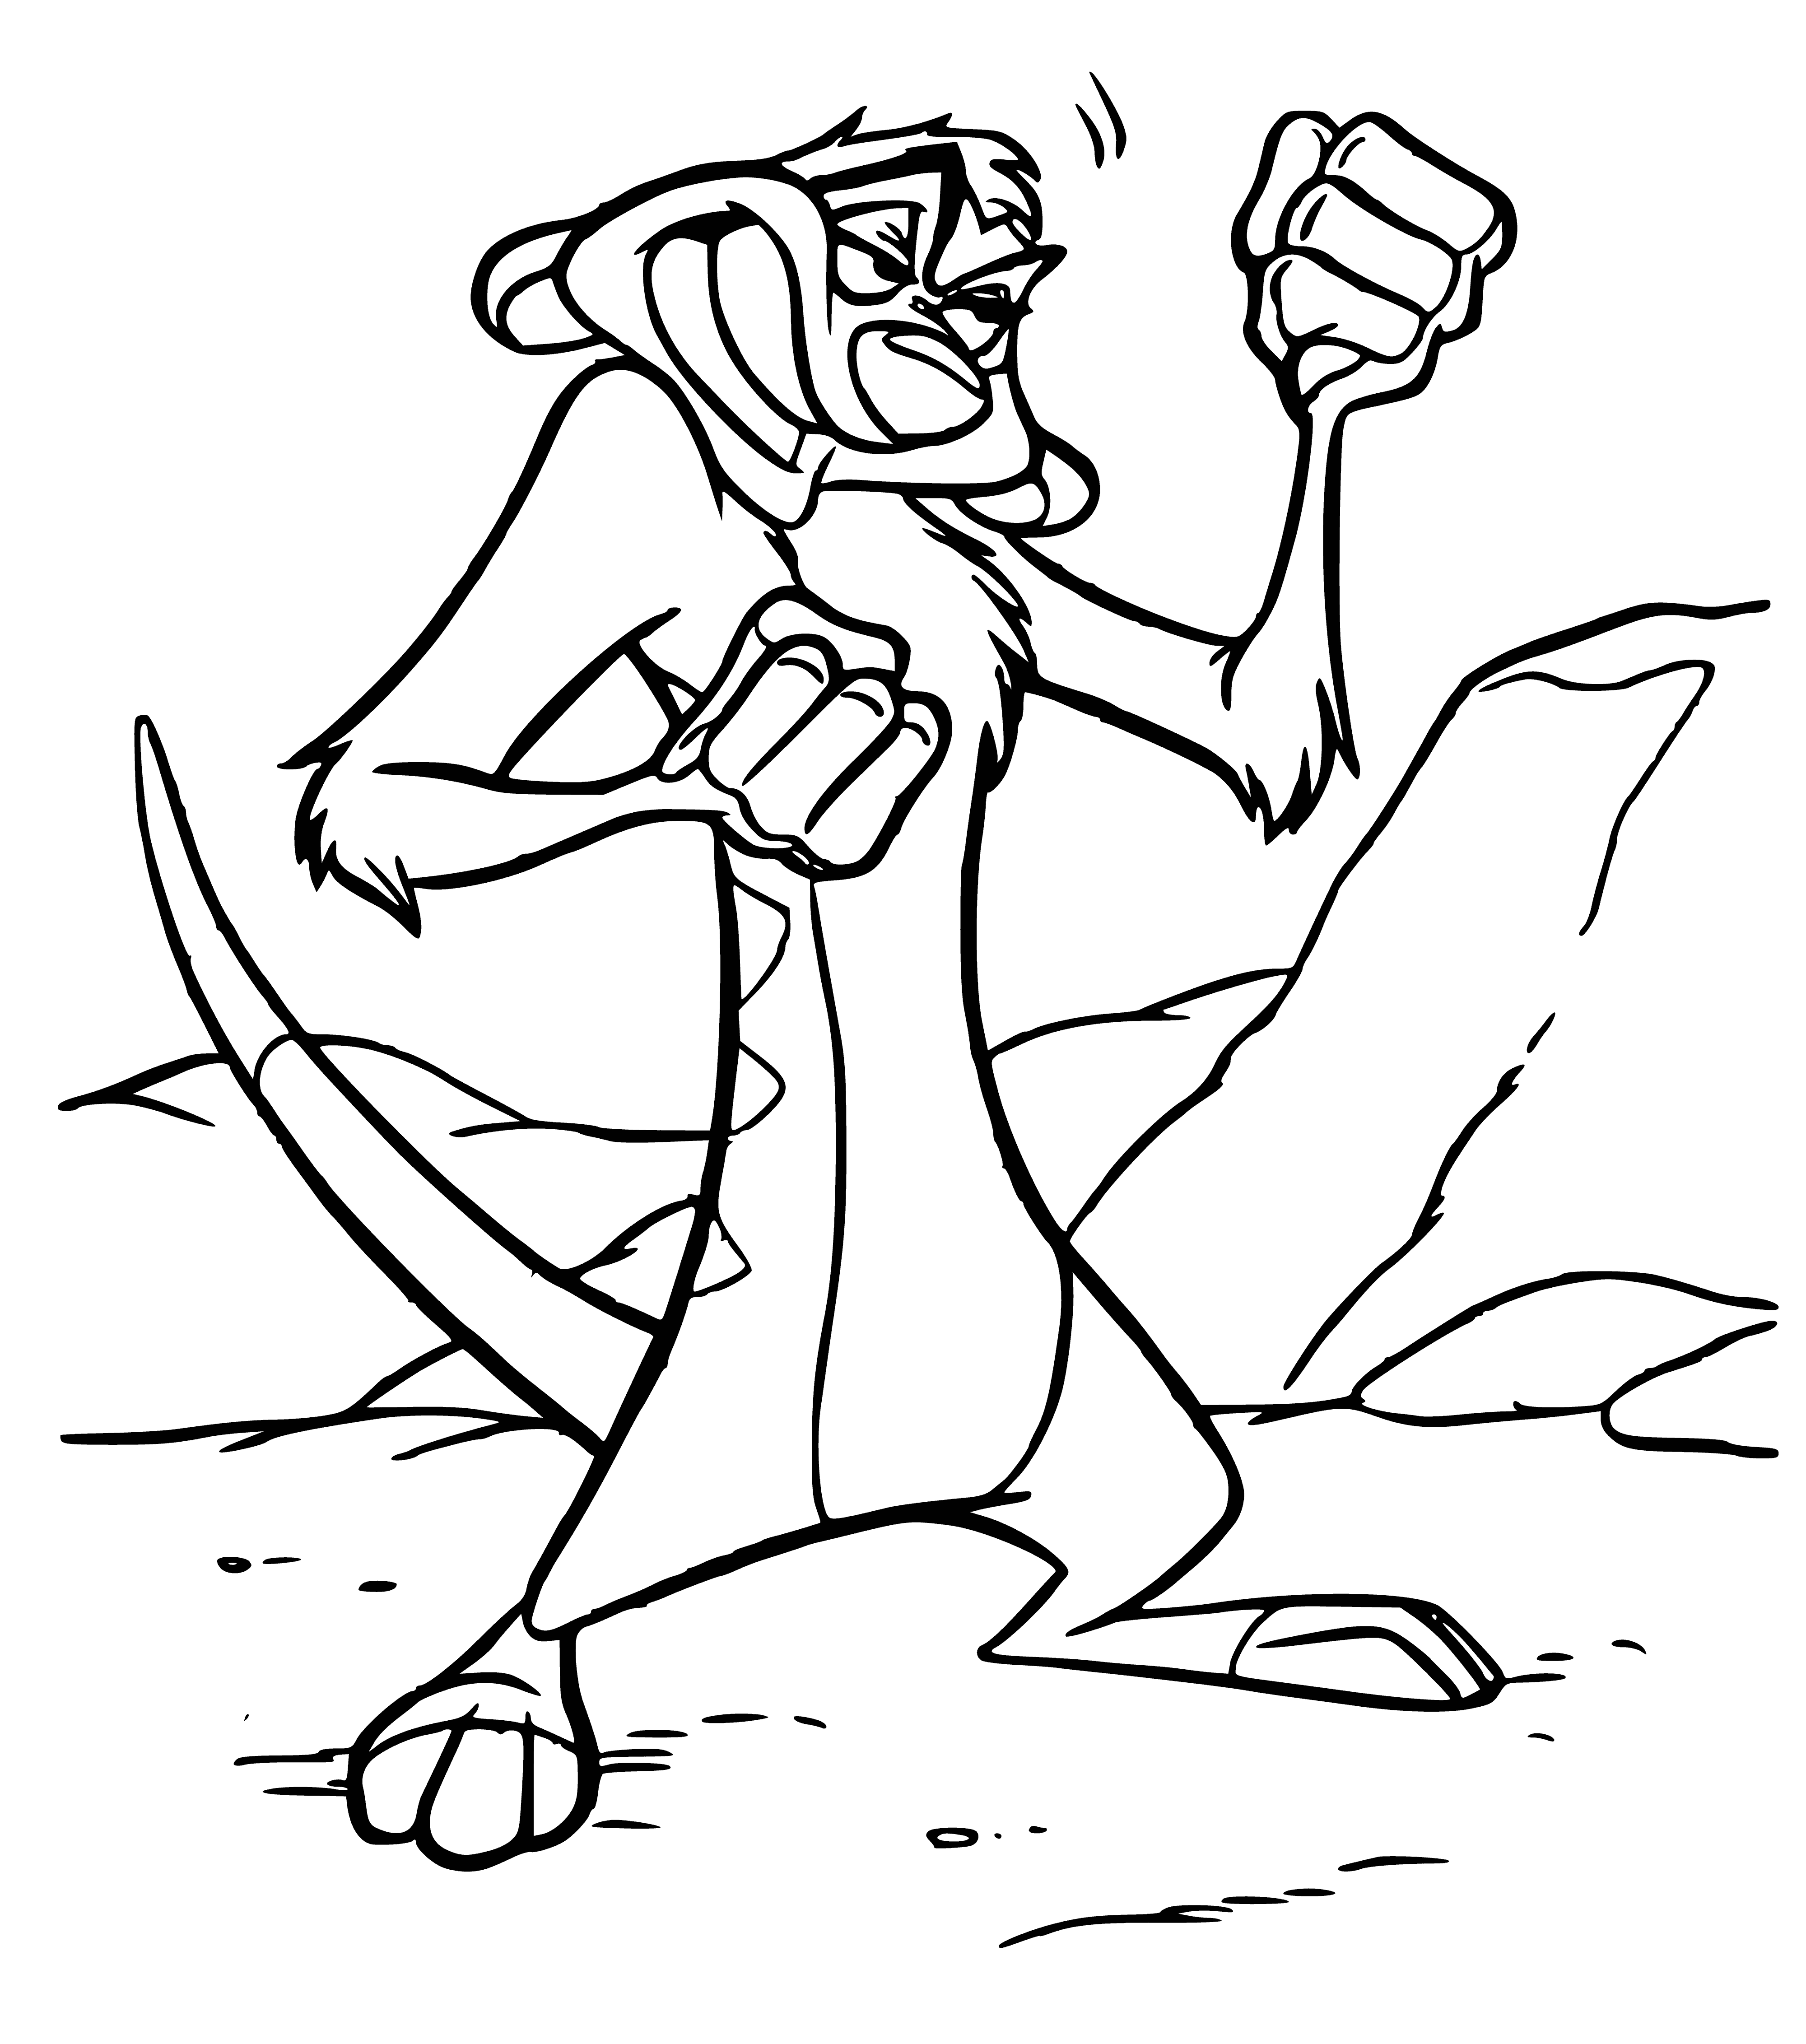 coloring page: An old, mischievous raccoon peers out from beneath a tuft of gray fur, worn brown loincloth, and droopy ears.